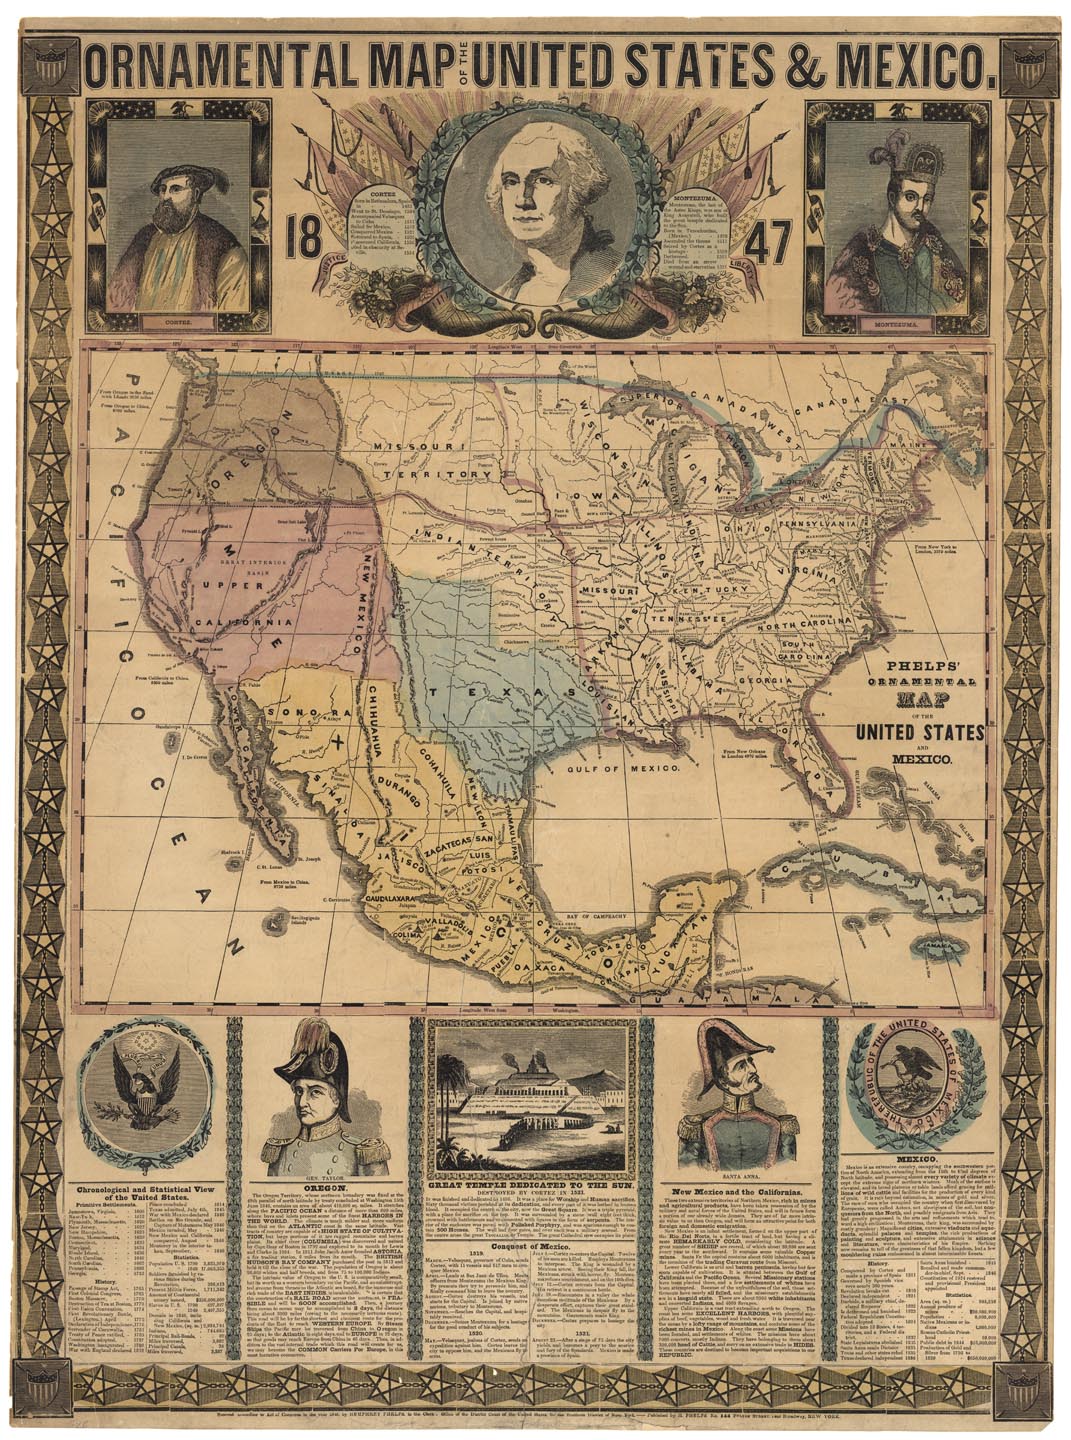 Ornamental Map of the United States & Mexico. 1847.